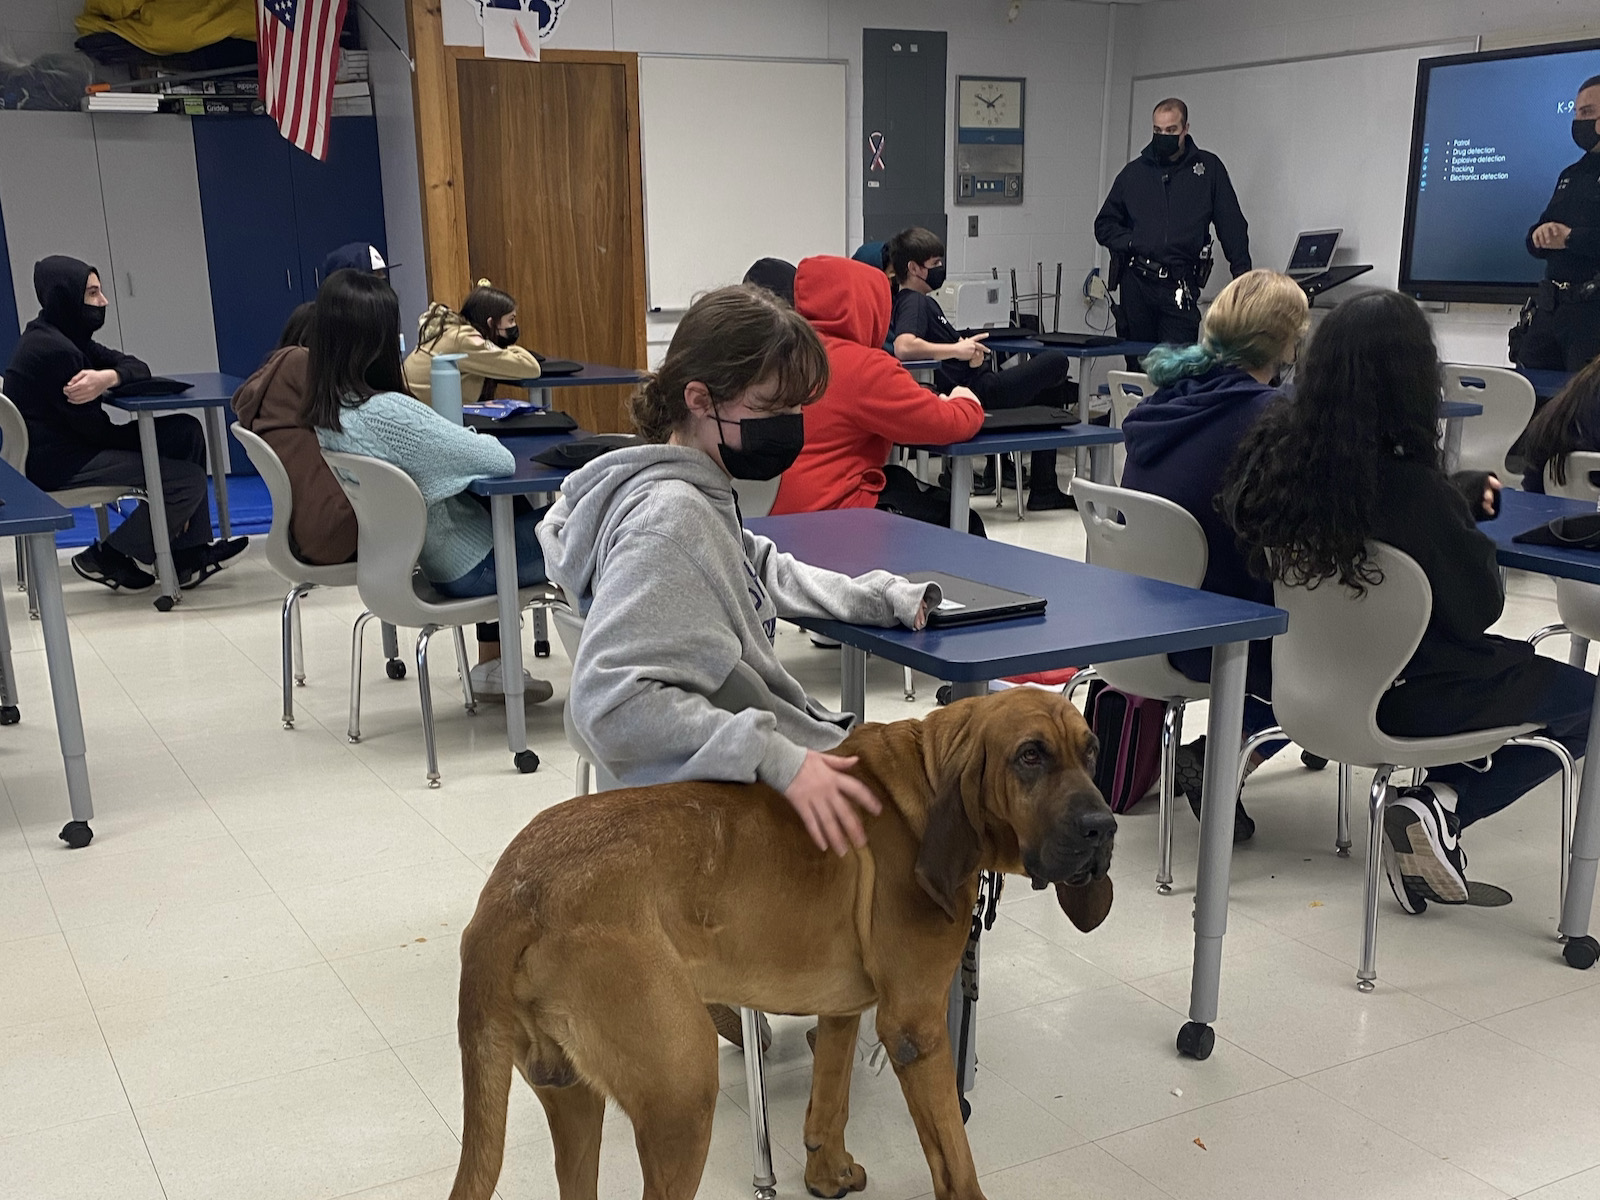 Thank you to Deputy Meury and Deputy Hill, with his K-9 Flash, for their presentation about the Putnam County Sheriff’s K-9 unit